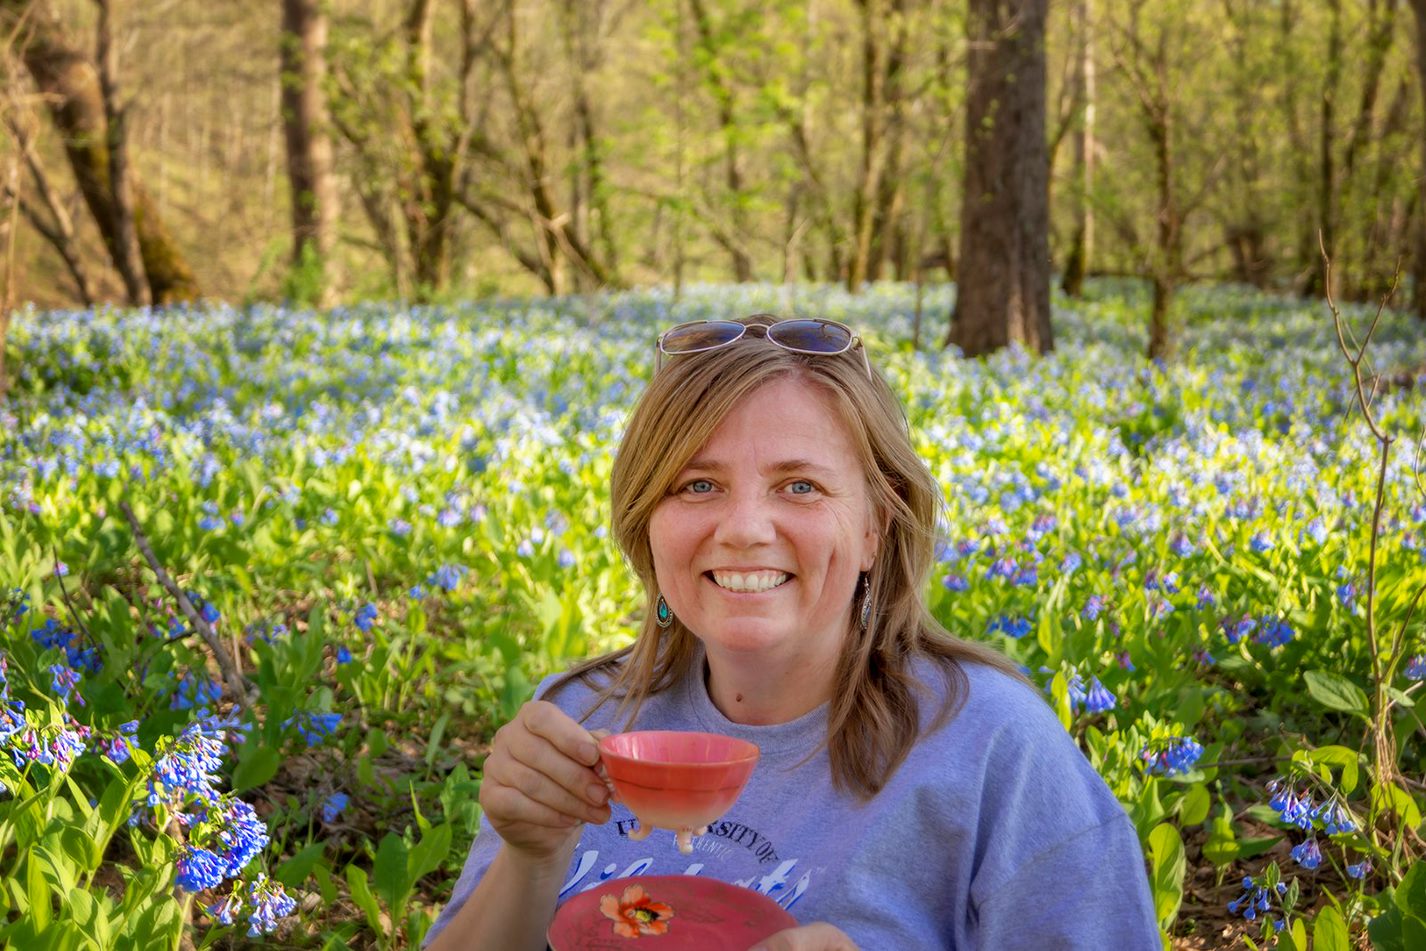 Tea on the Trail's Nicole McKinney--a blond woman, smiling, with sunglasses on top of her head, holding a footed pink teacup and matching saucer, in front of a field of bluebells.